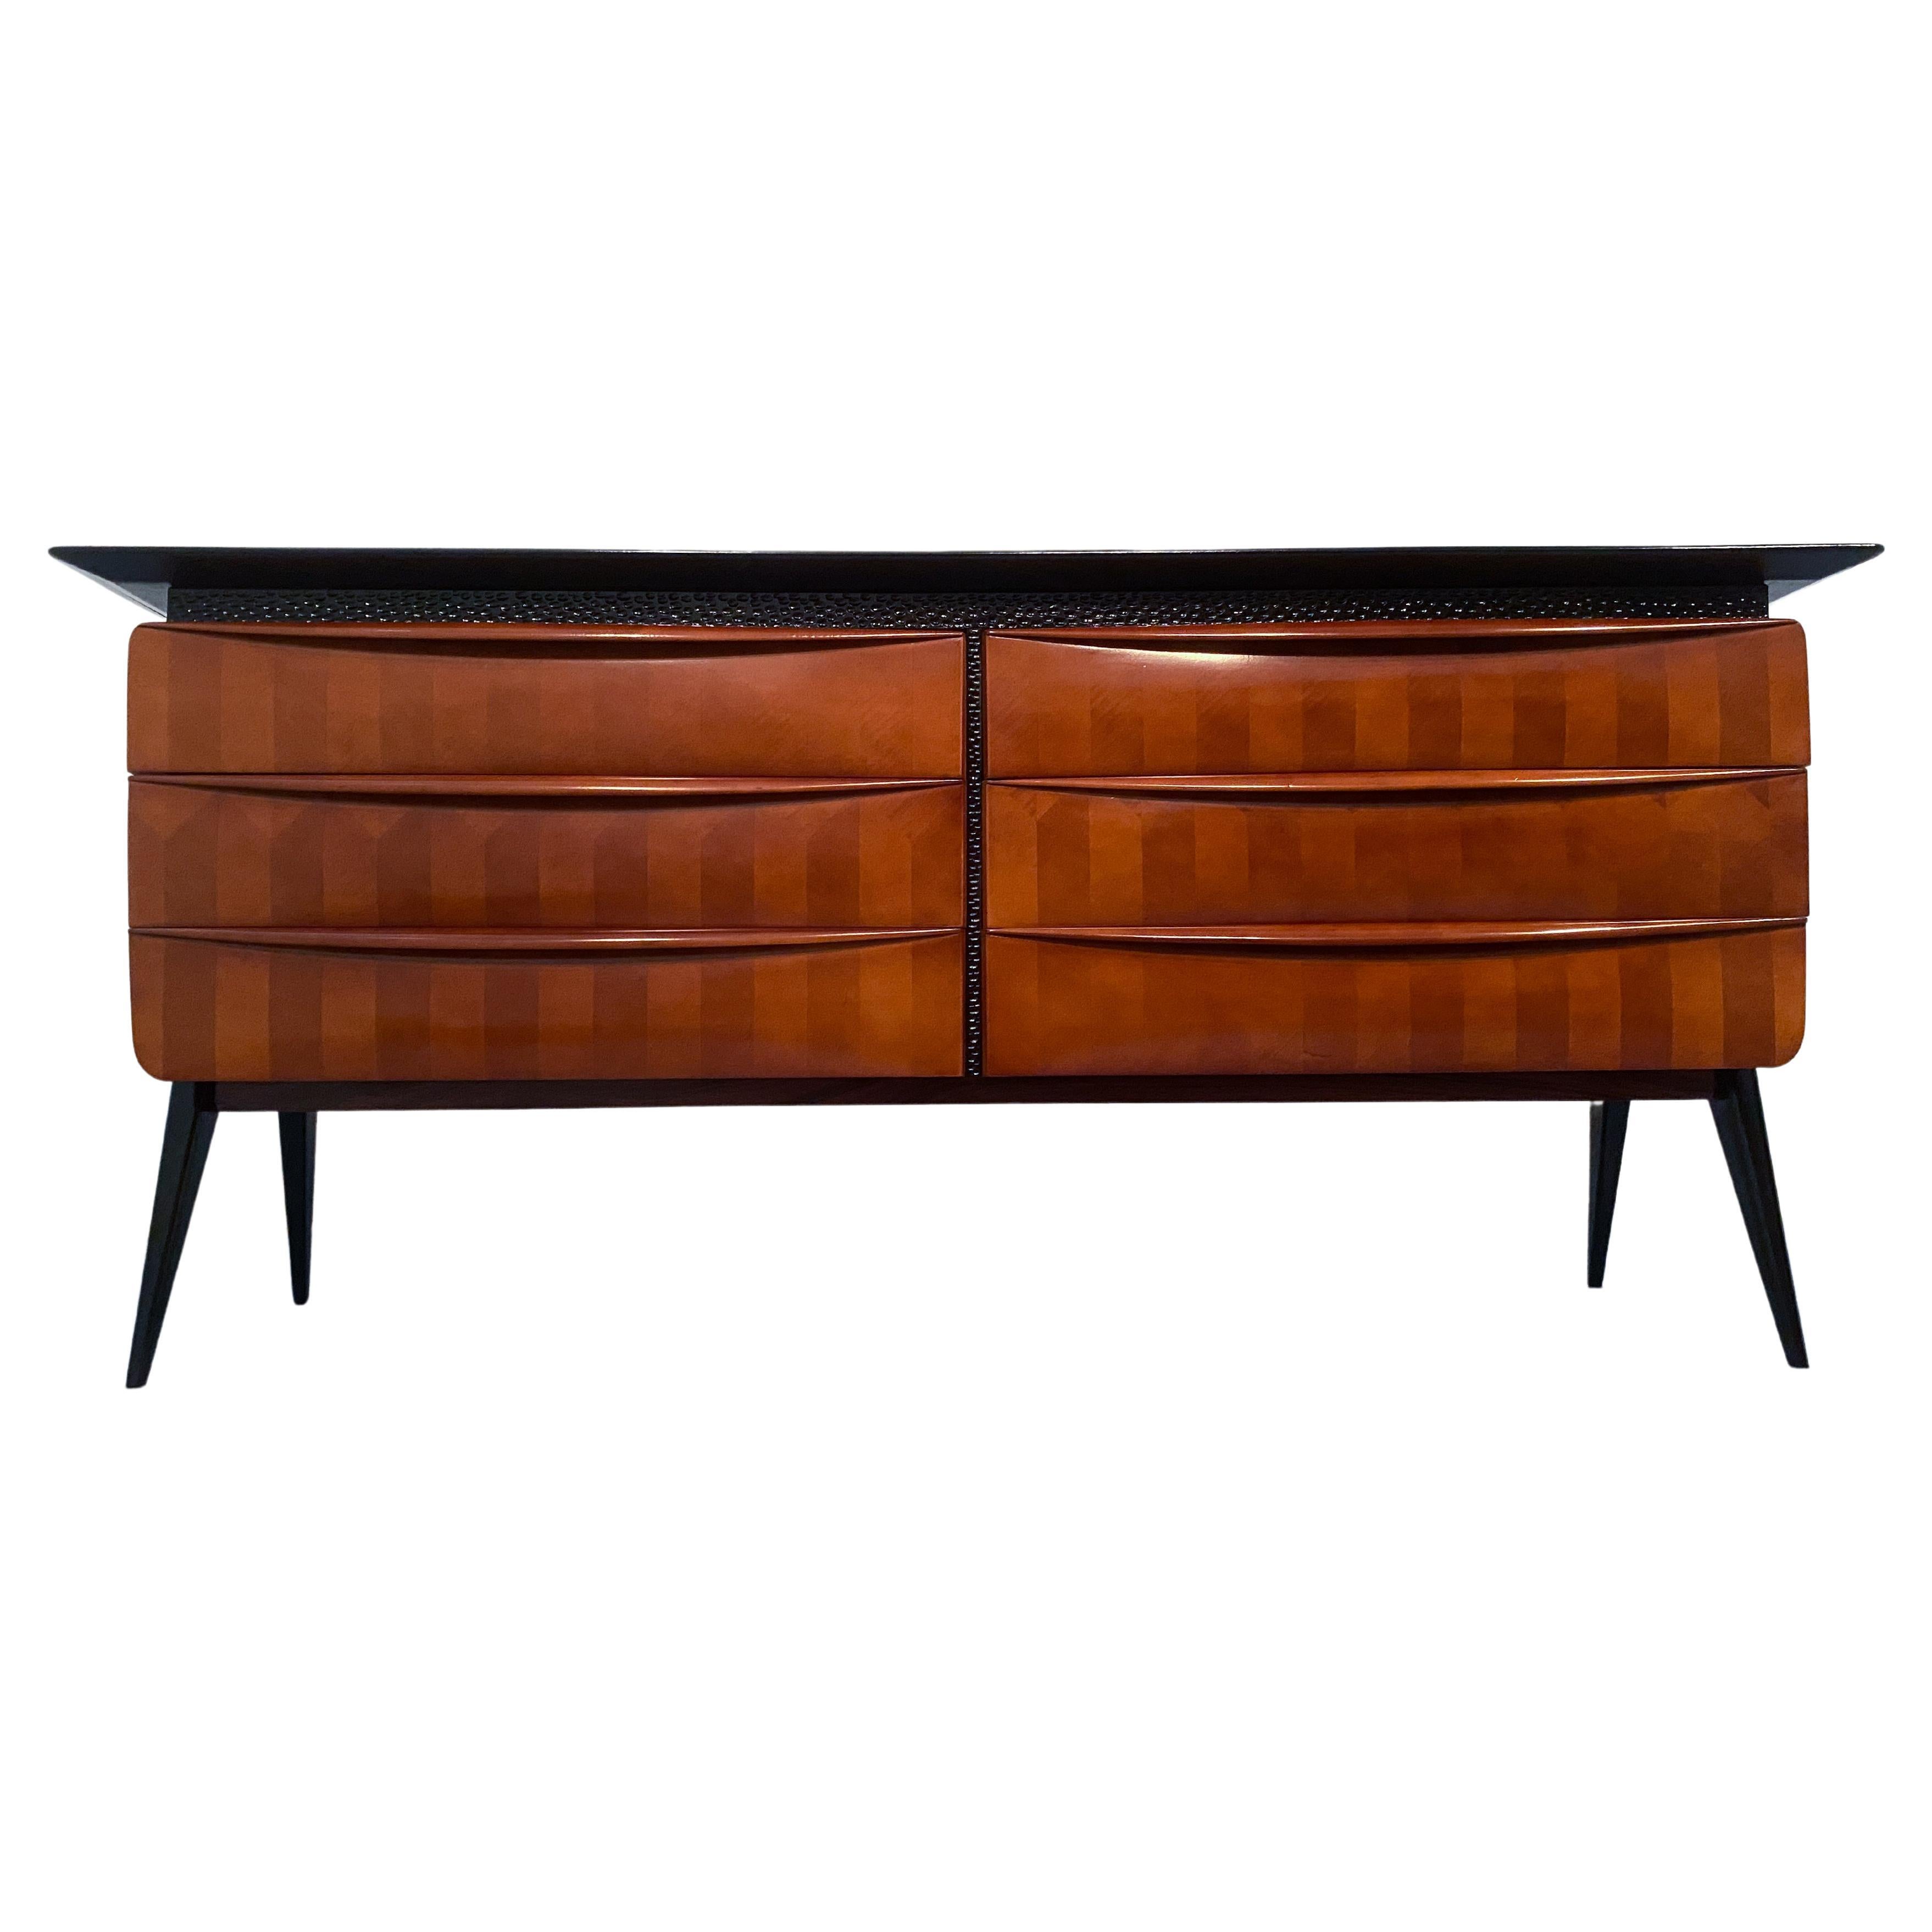 This exquisite Italian sideboard or chest of drawers crafted by Permanente Mobili of Cantù in the late 1950s is a stunning example of mid-century modern design. The beautiful woodwork on the front of the six drawers creates a striking contrast